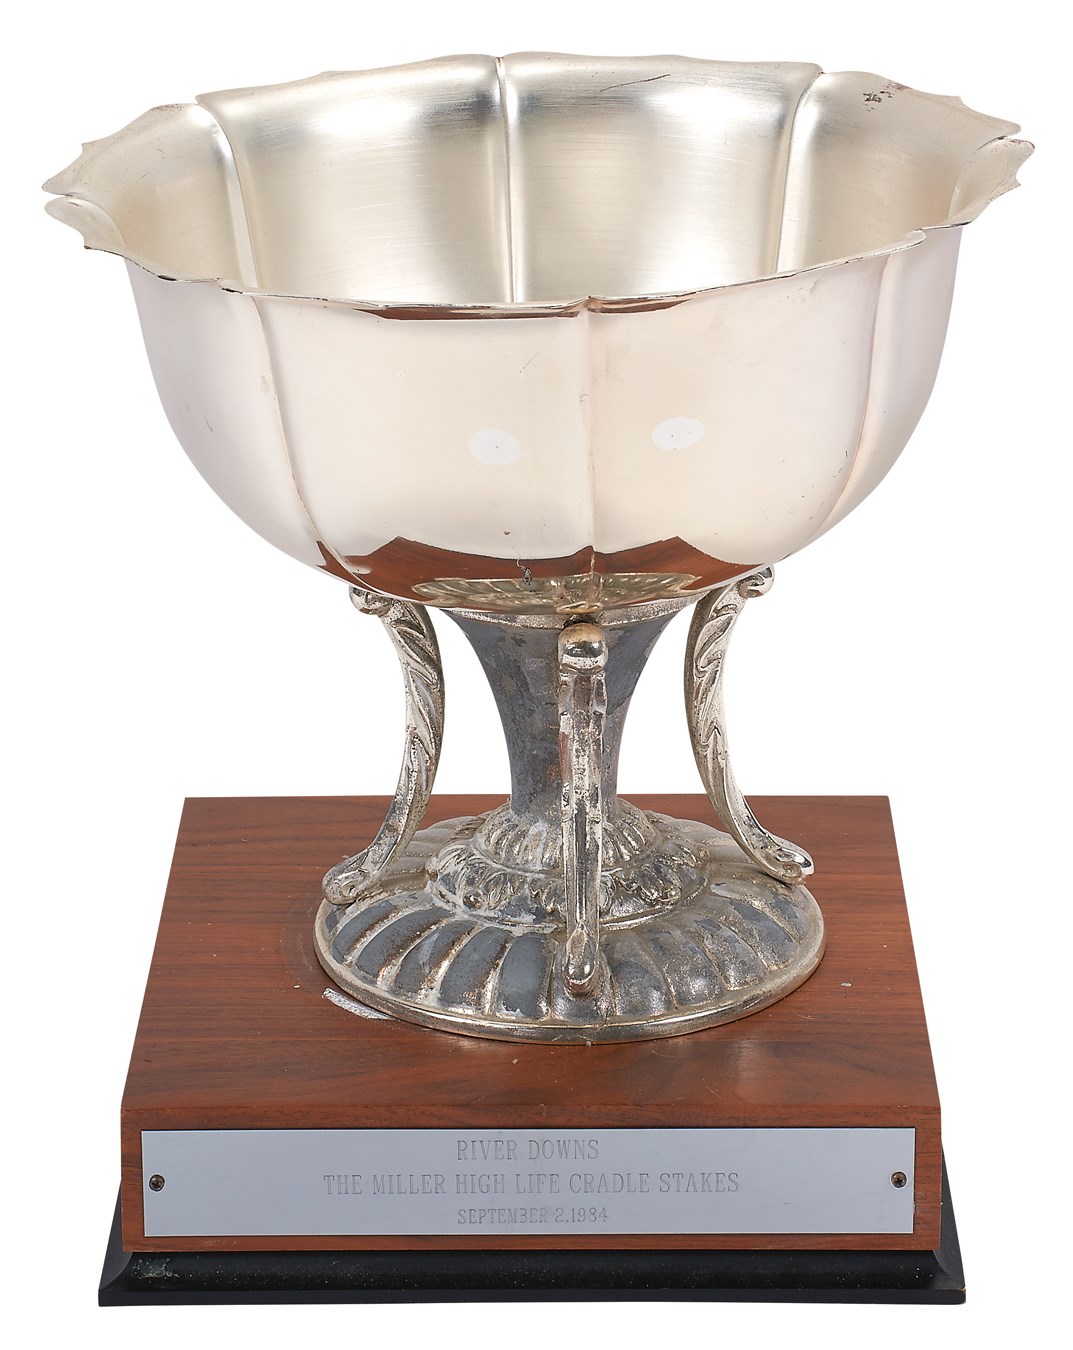 "Spend A Buck" 1984 Cradle Stakes Trophy